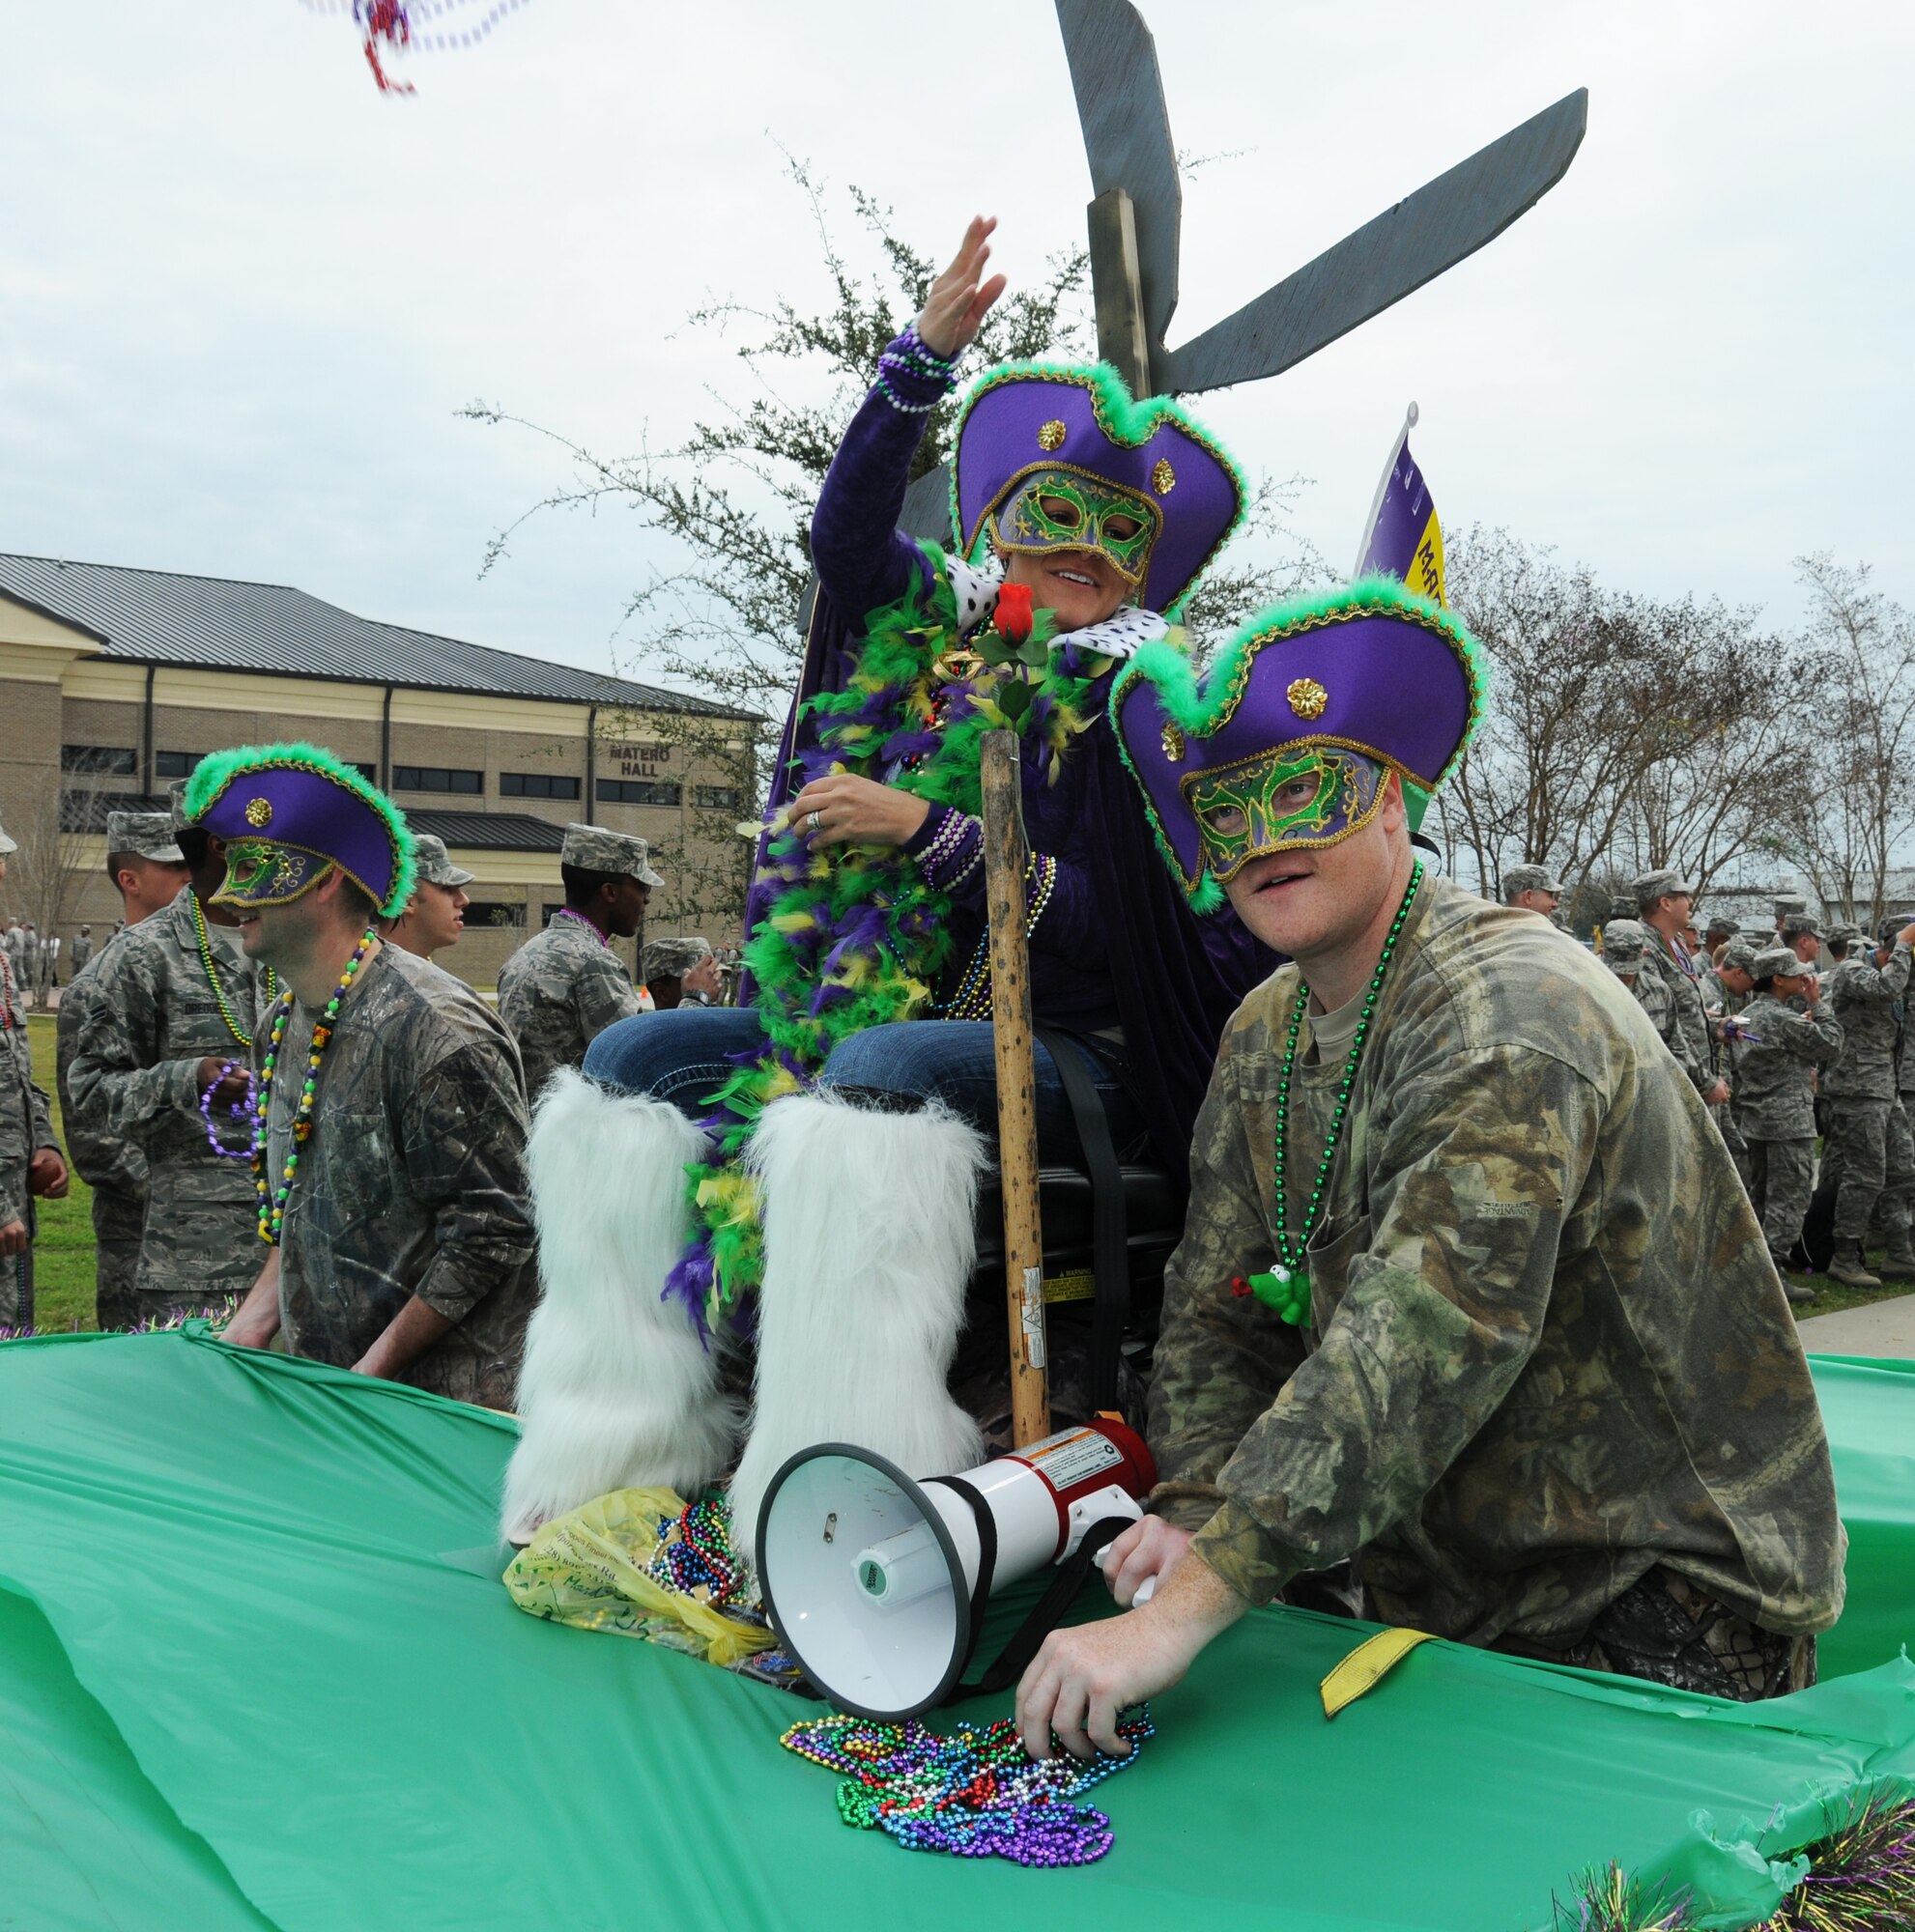 Tech. Sgt. Jason McAlpin and Staff Sgts. April Omara and Brady Dunbar, 334th Training Squadron “Krewe of the Swamp People,” throw beads to the crowd during the 81st Training Group Mardi Gras parade Feb. 10, 2012.  The parade stretched from Thomson Hall to Matero Hall at Keesler Air Force Base, Biloxi, Miss.  (U.S. Air Force photo by Kemberly Groue)